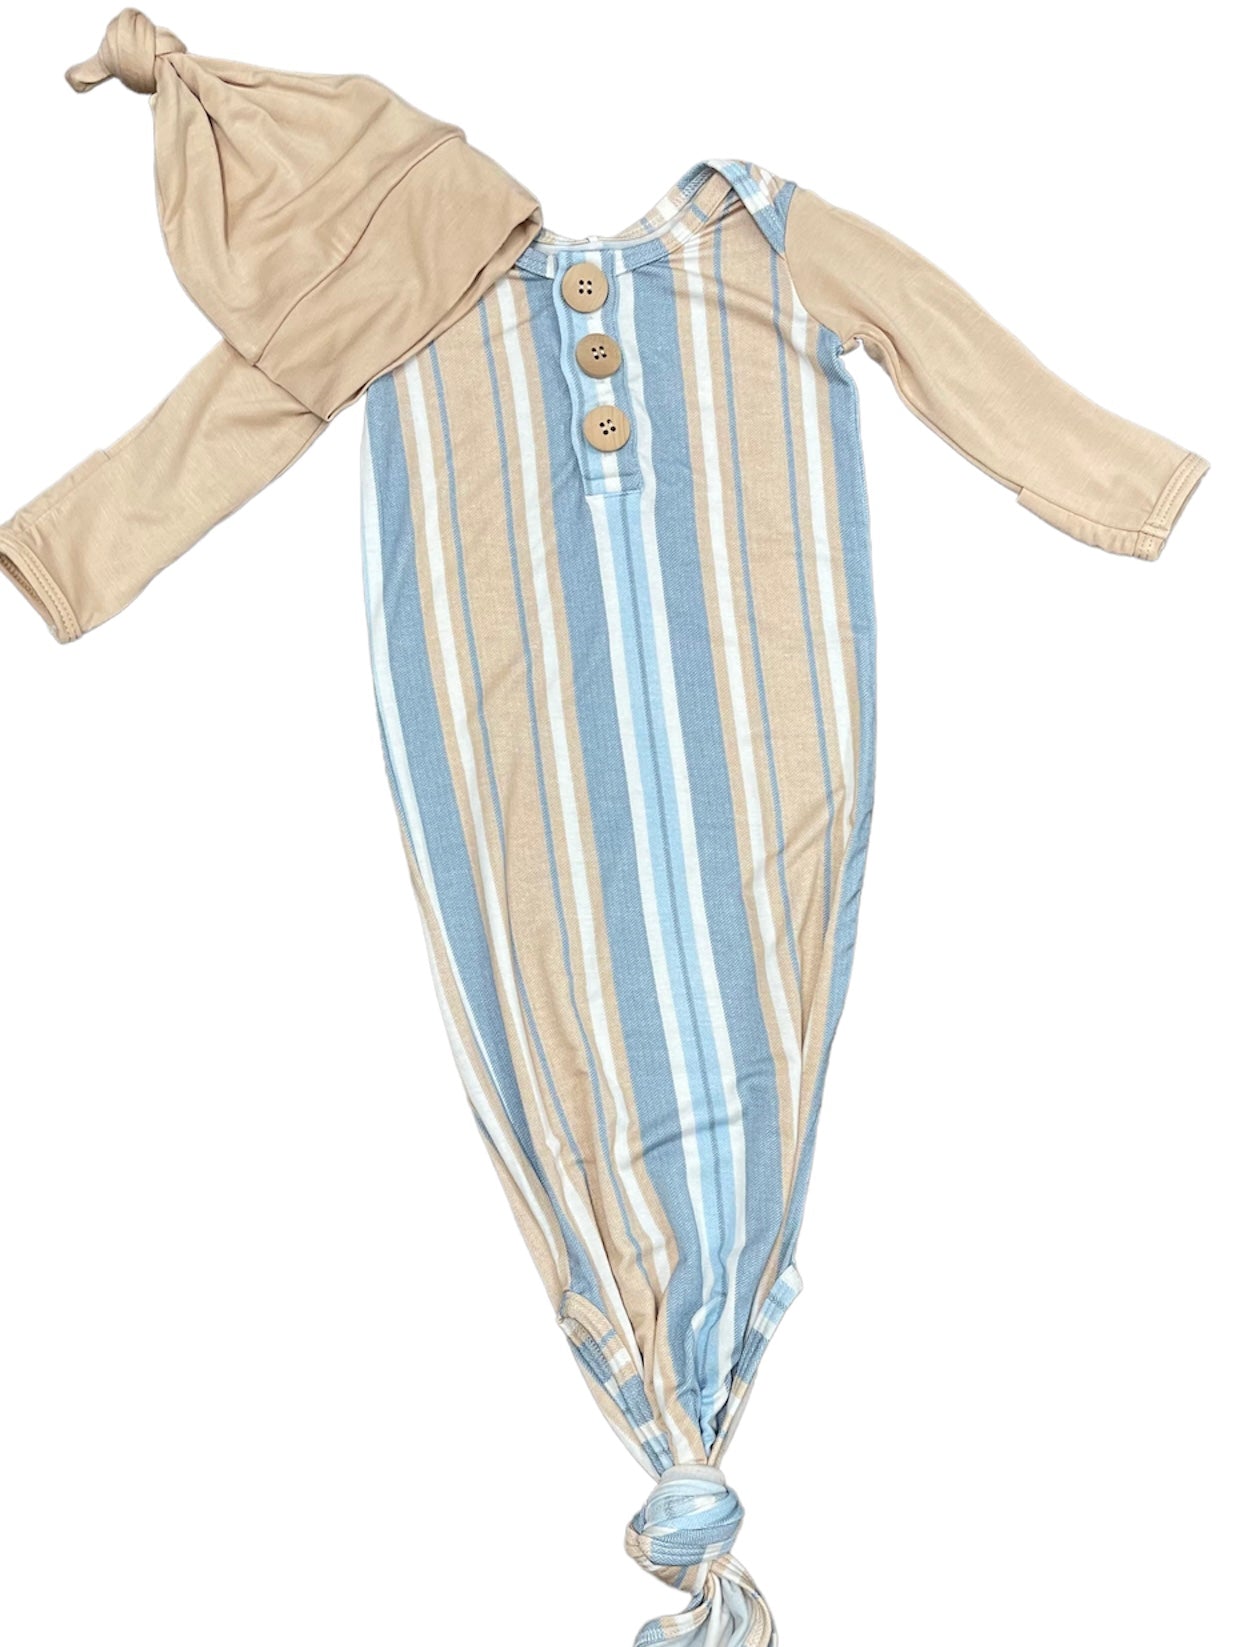 Hurley Stripe Gown & Hat